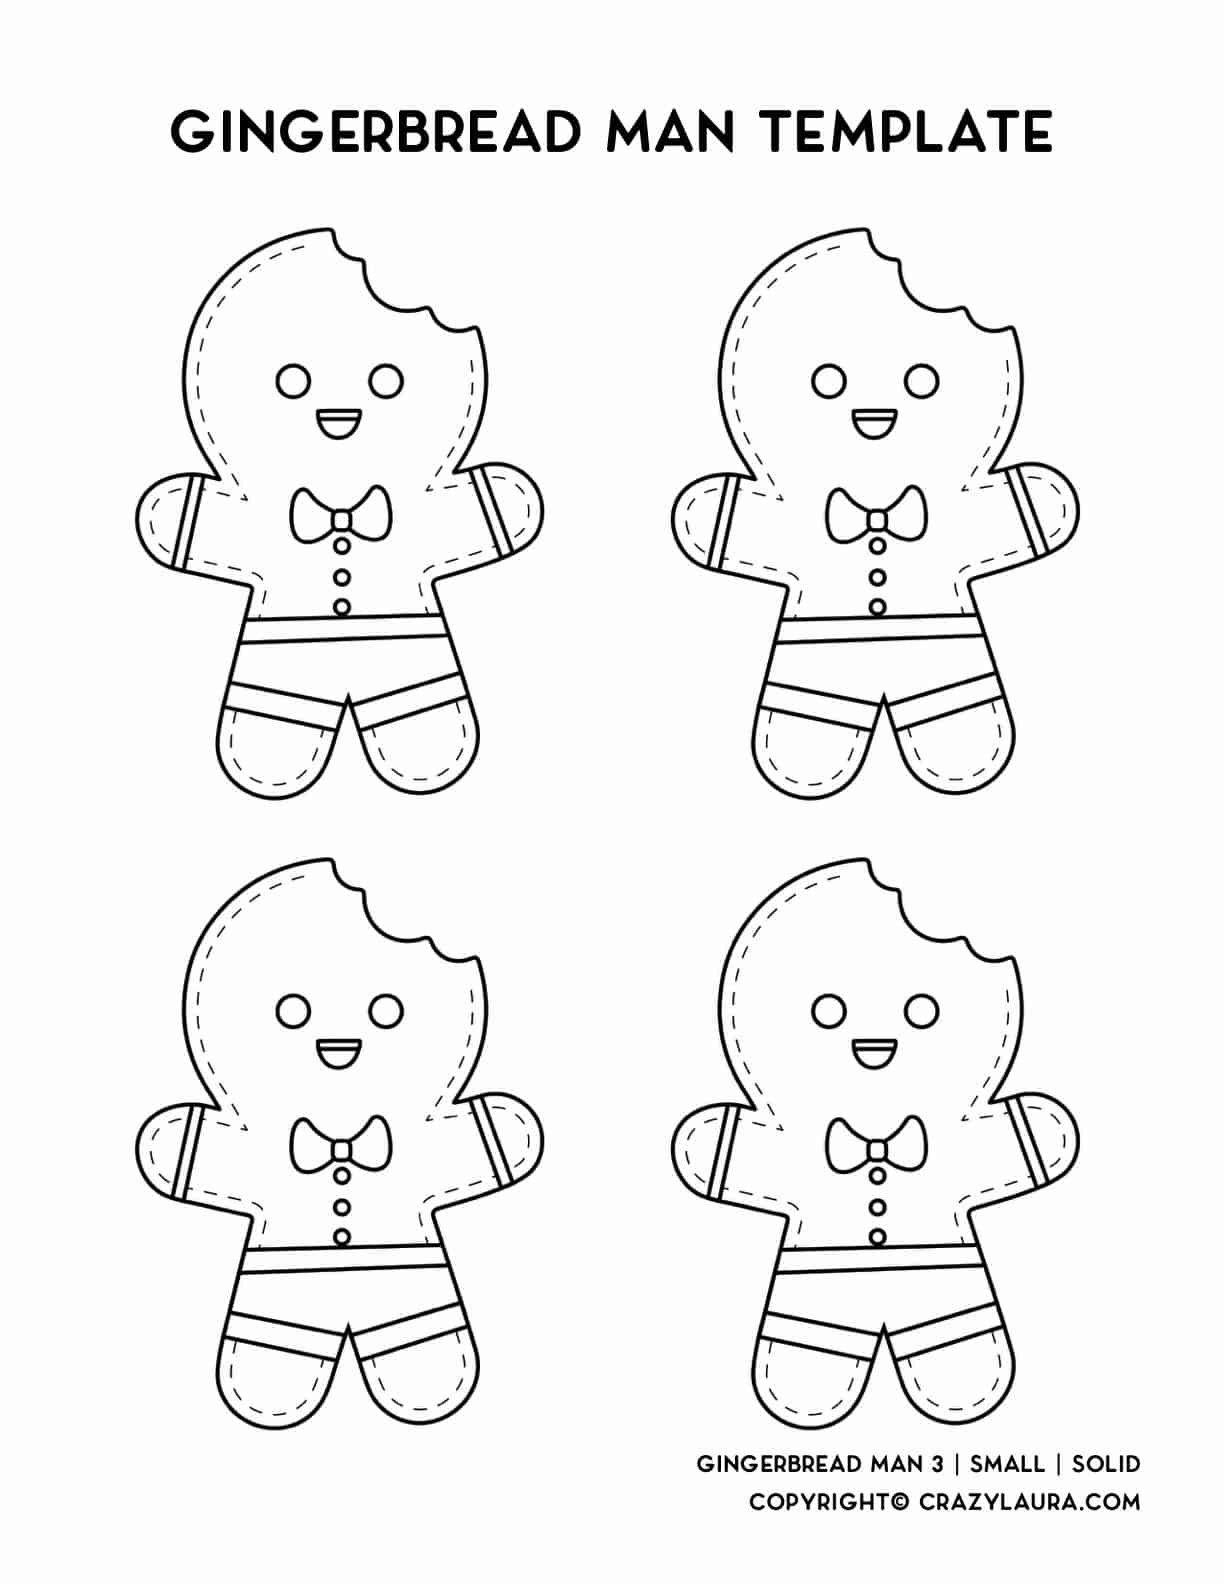 small templates of christmas gingerbread man outlines